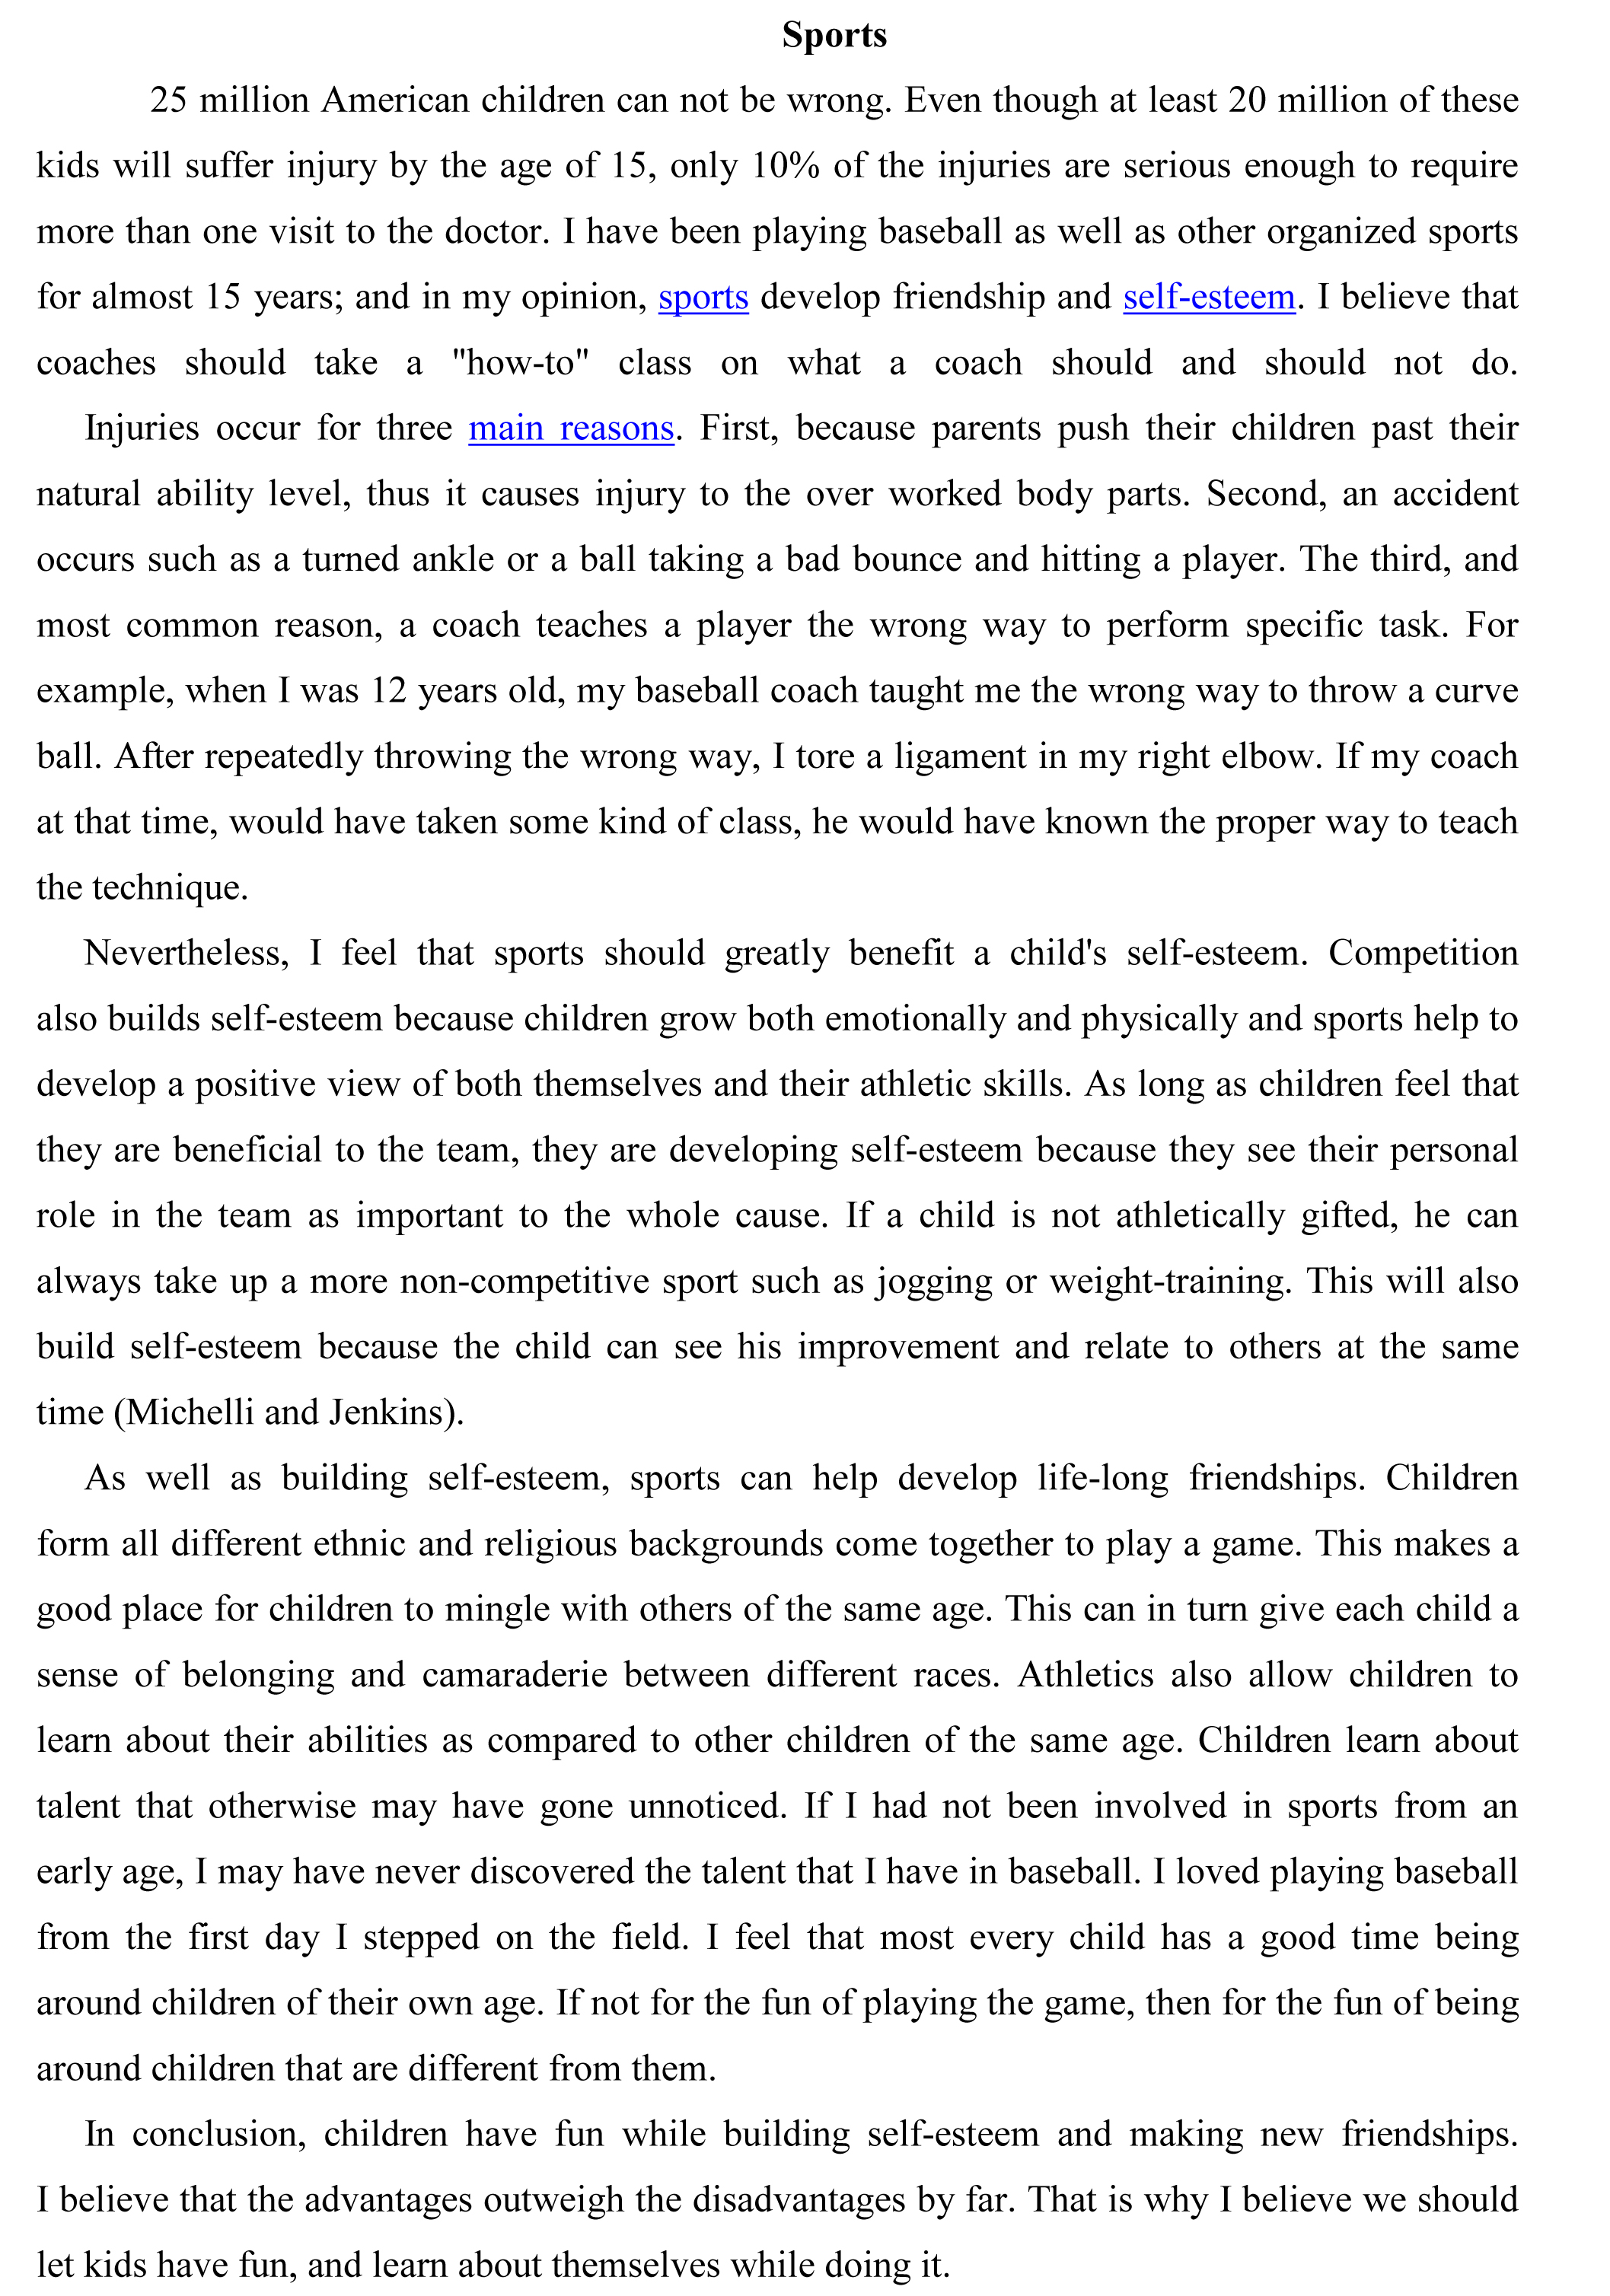 Essay on Sports for Children and Students